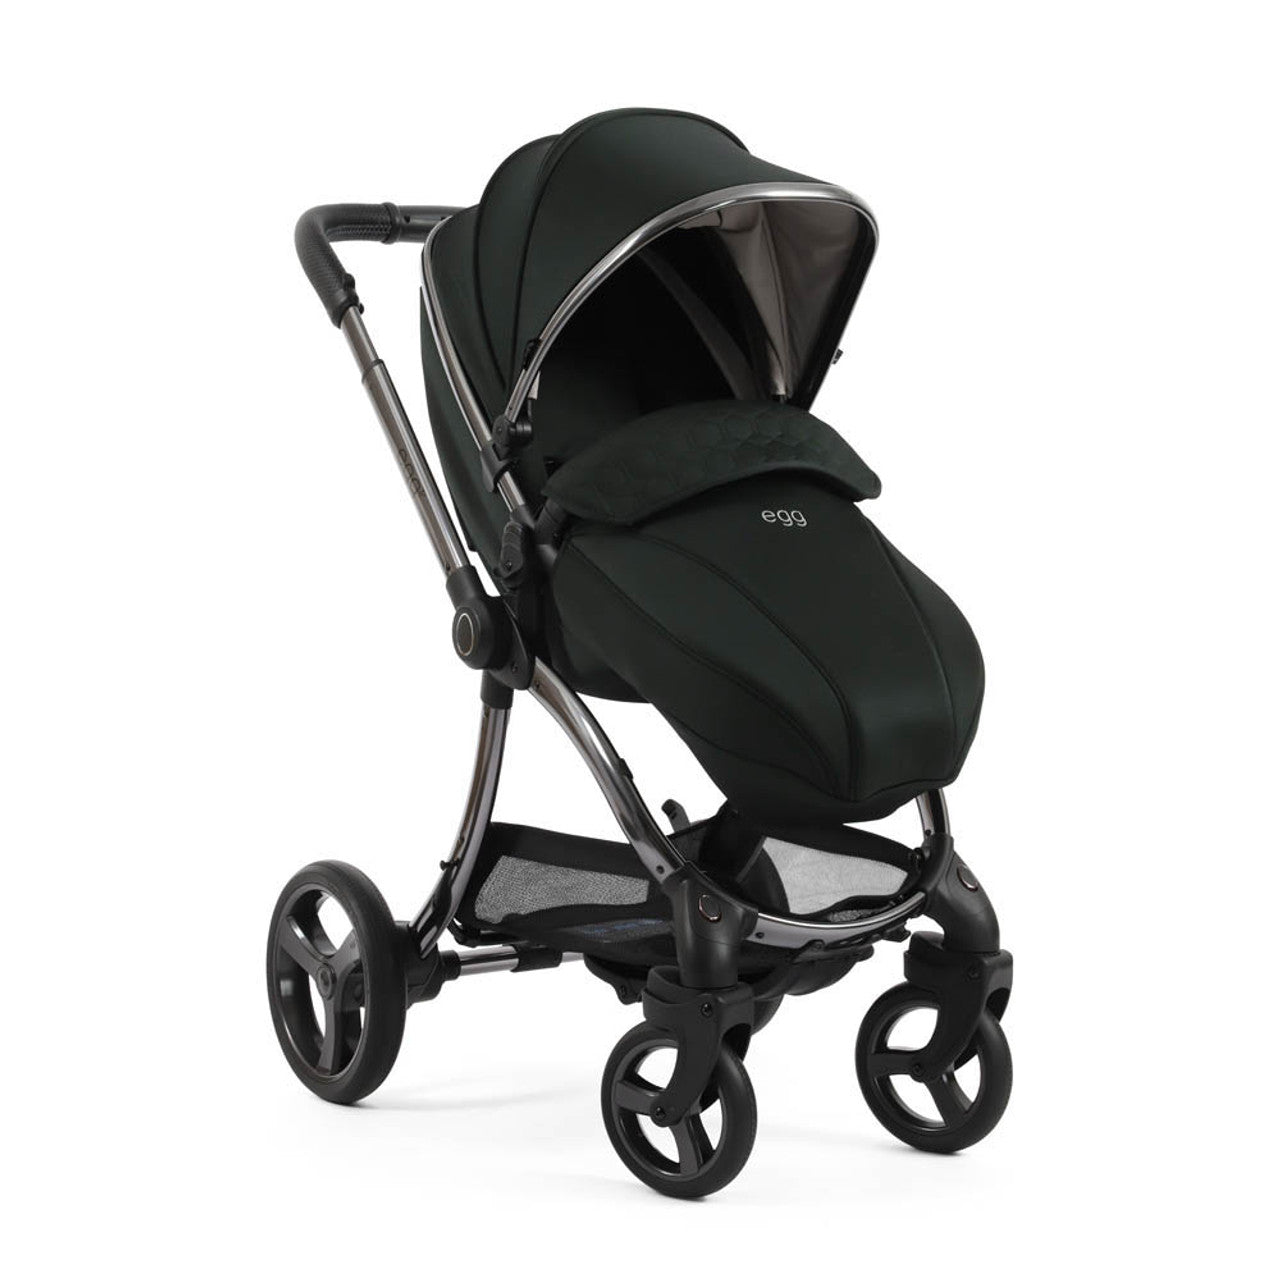 Egg® 3 Pushchair + Carrycot 2 in 1 Pram - Black Olive -  | For Your Little One